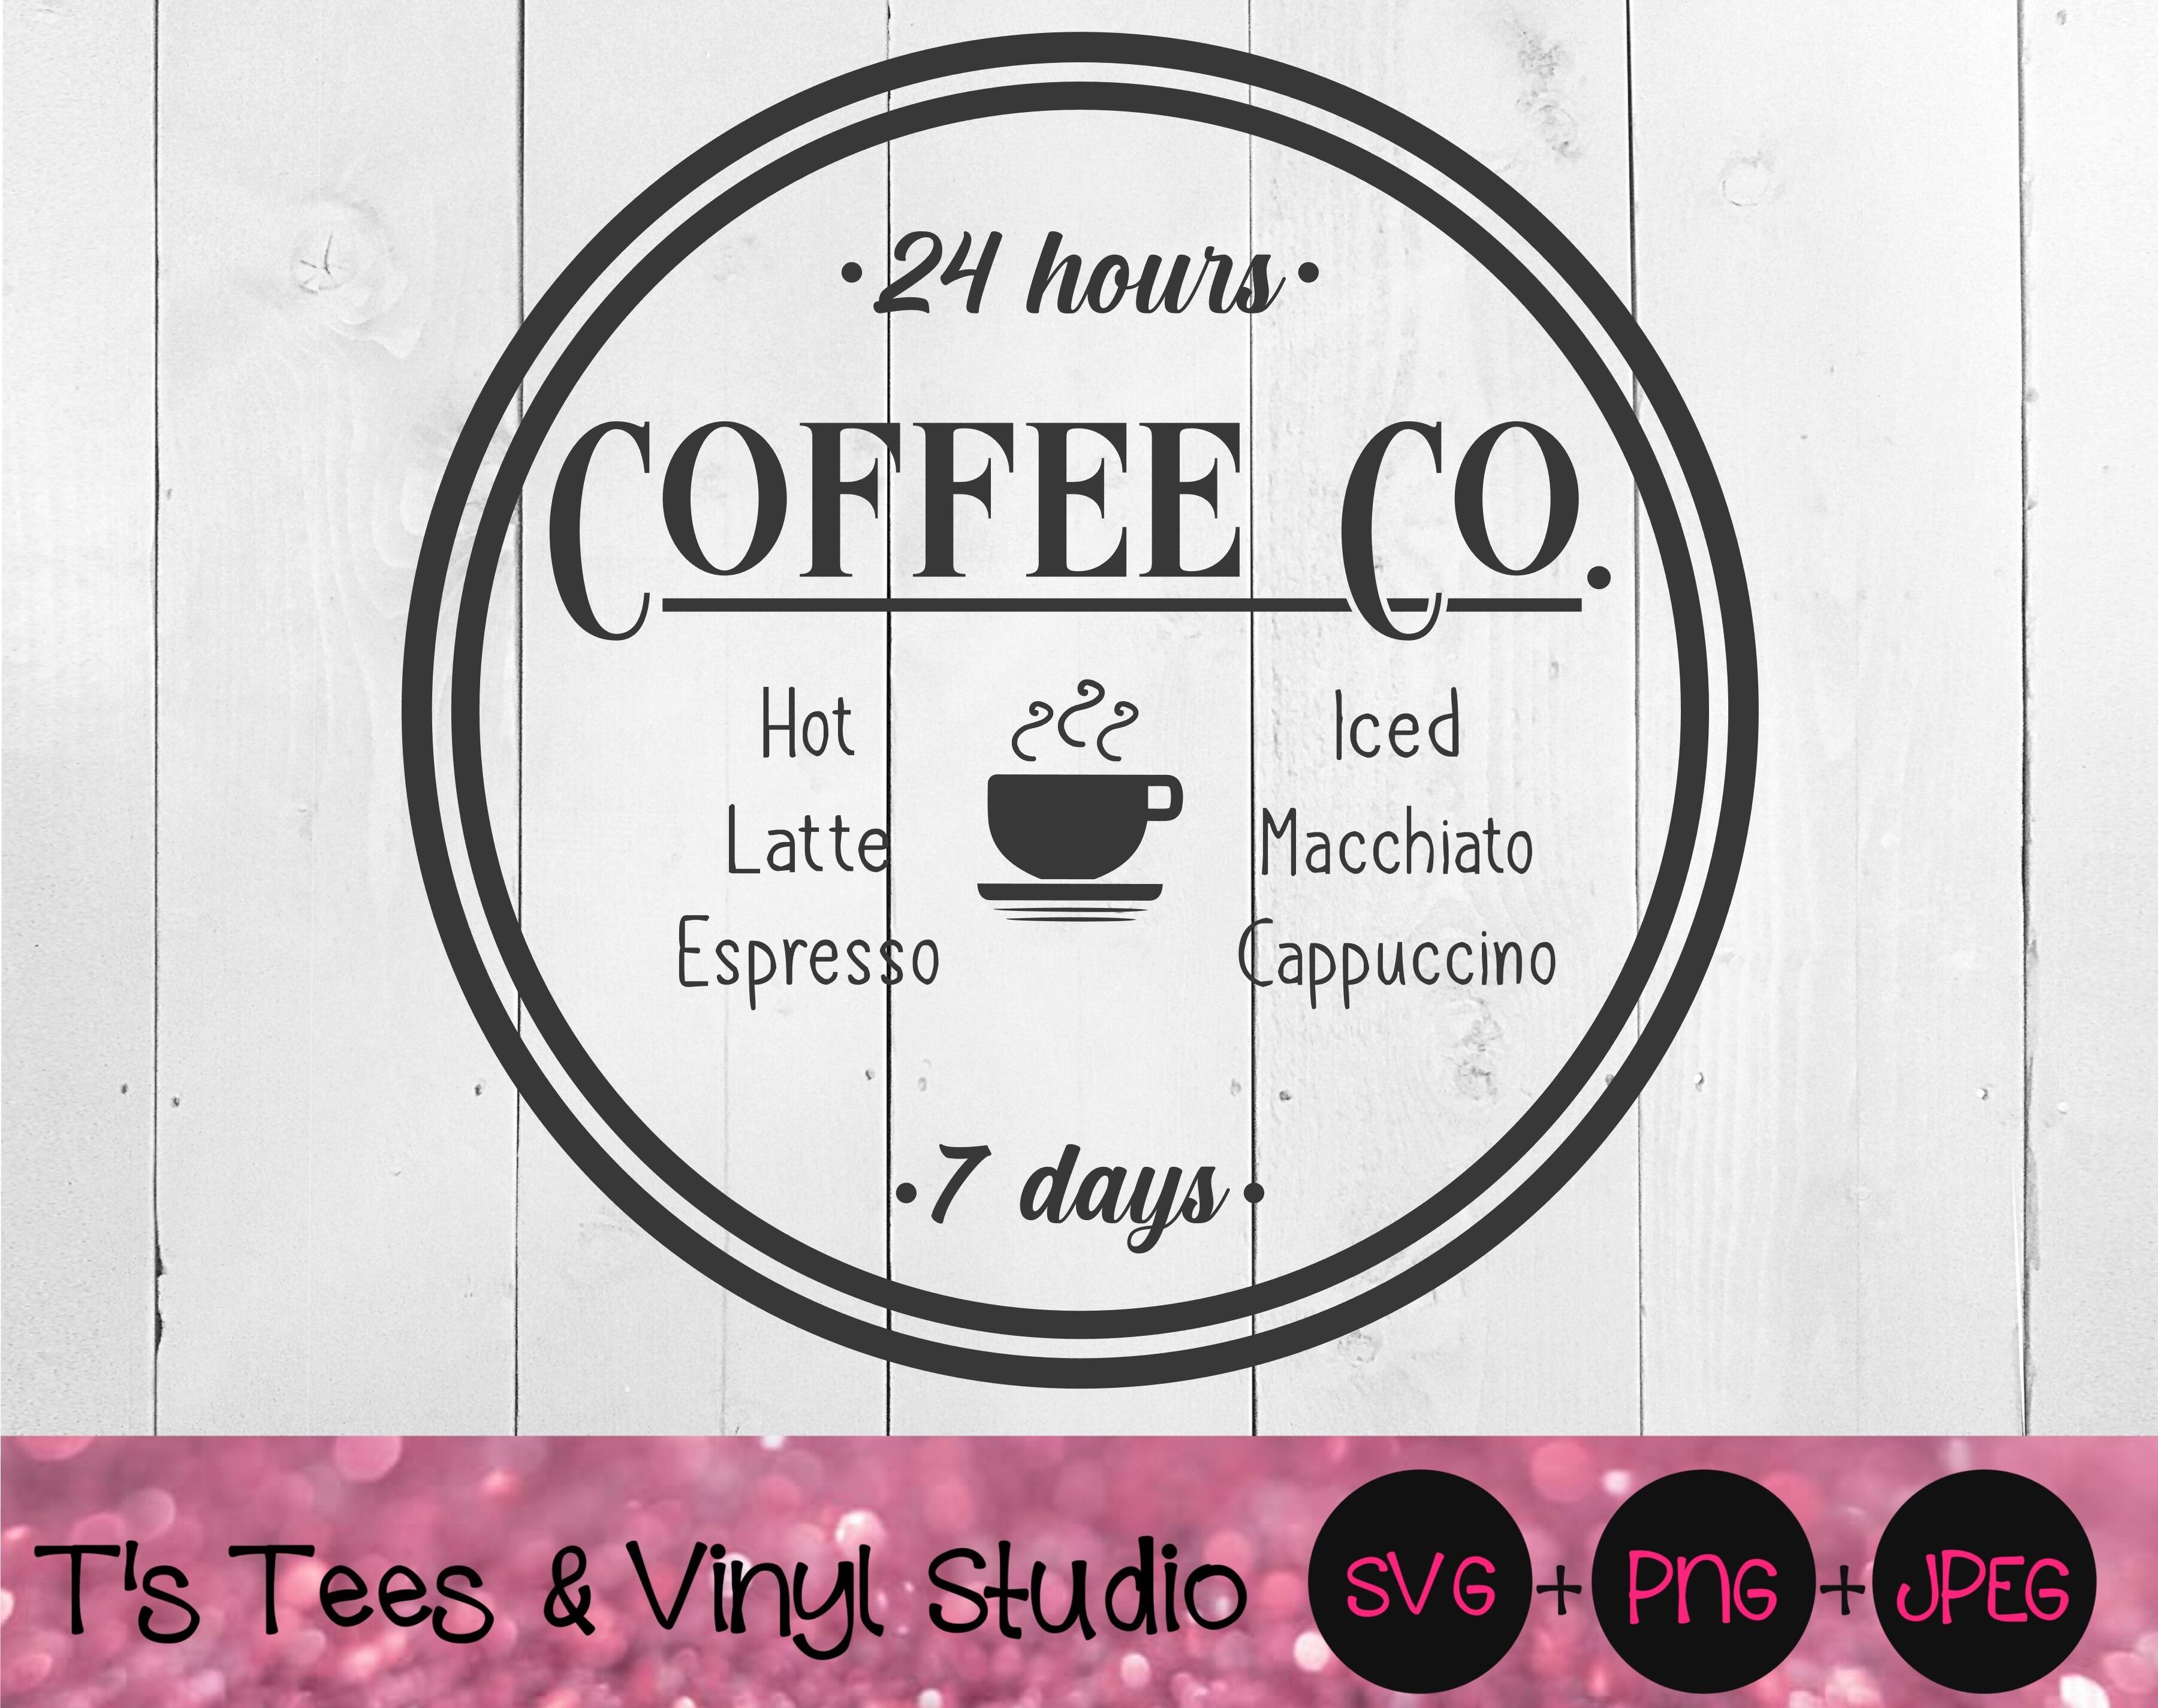 Download Coffee Company Coffee Co Svg Coffee Sign Latte Iced Coffee Cappuc By T S Tees Vinyl Studio Thehungryjpeg Com